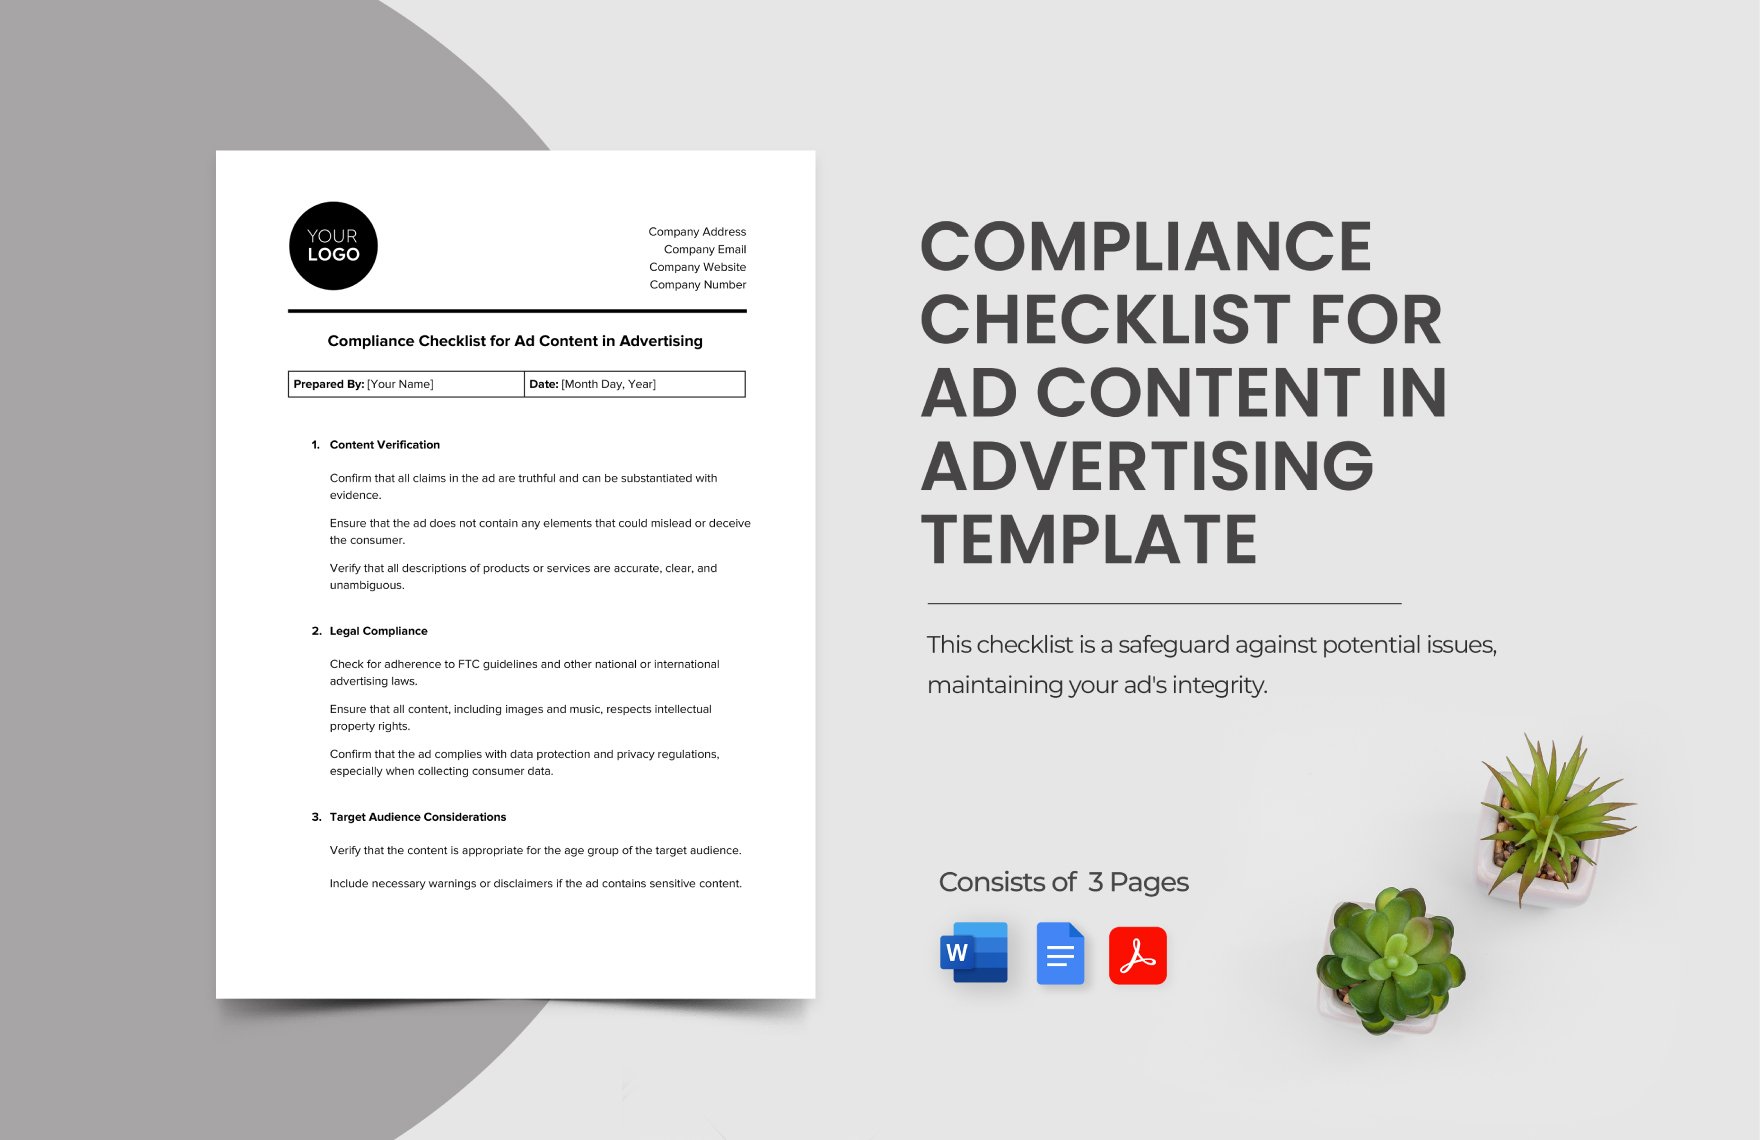 Compliance Checklist for Ad Content in Advertising Template in Word, Google Docs, PDF